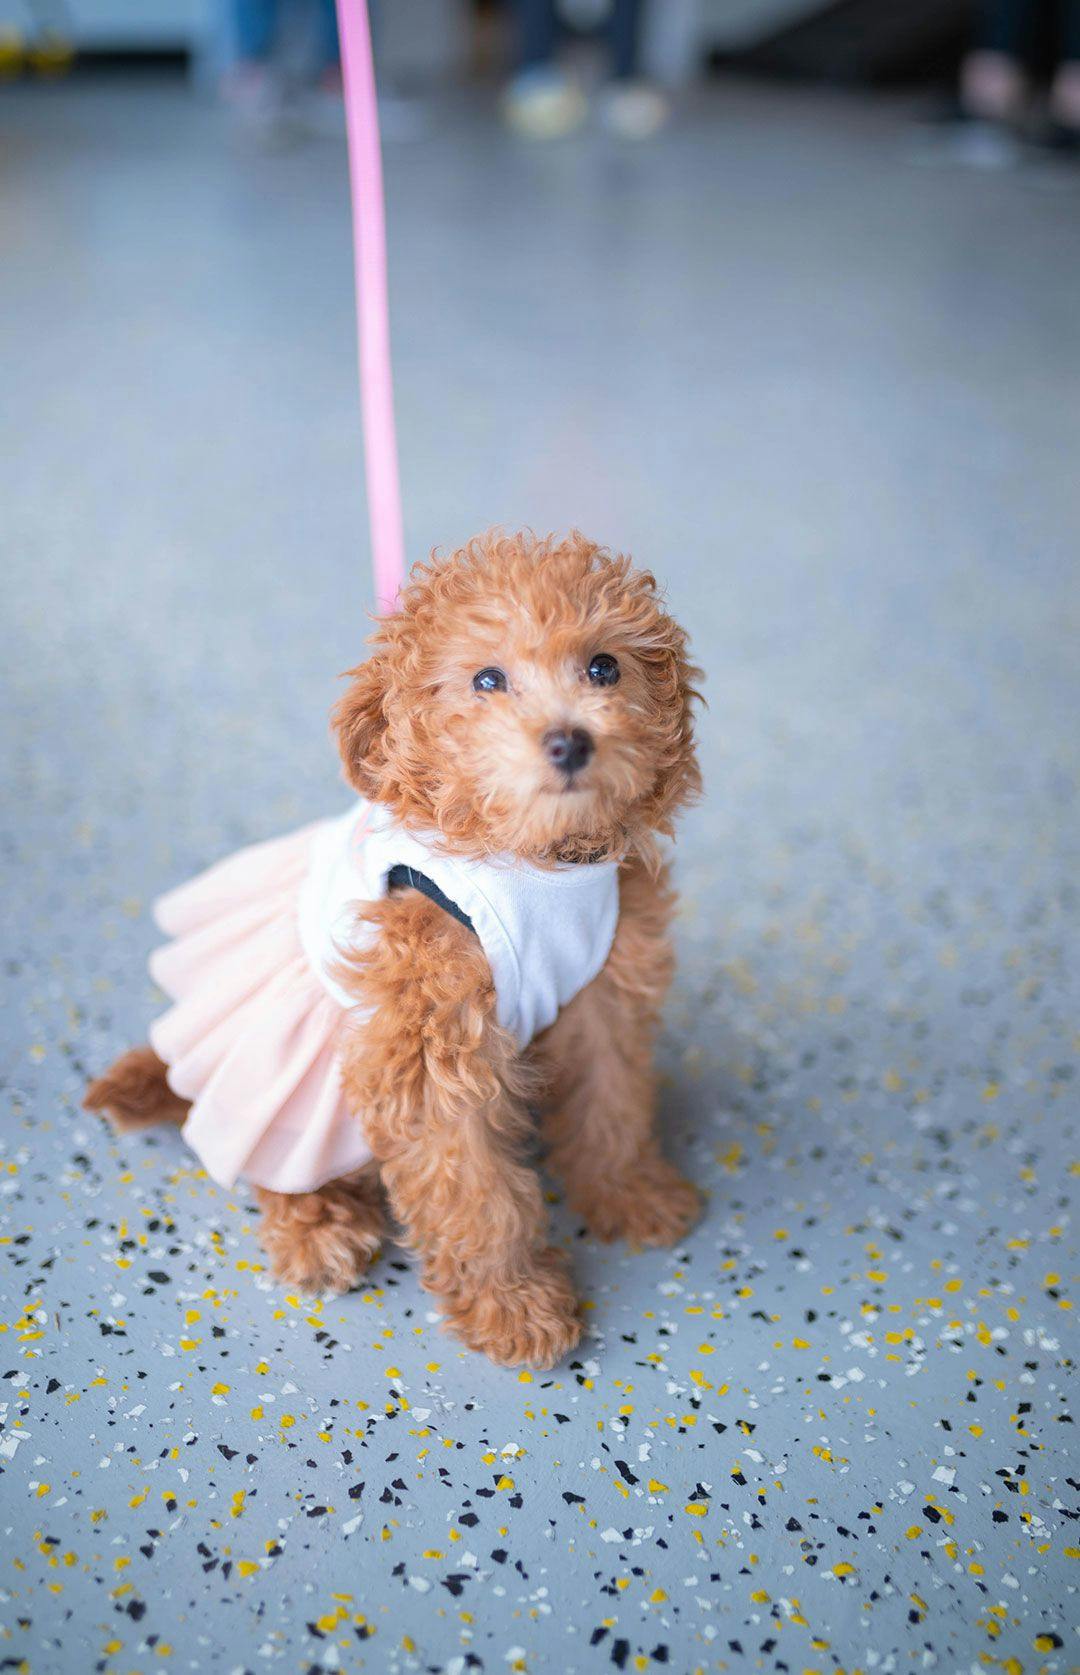 Small apricot poodle wearing a ballerina dress with a pink leash inside Playful Pack's Lobby in Arlington, VA